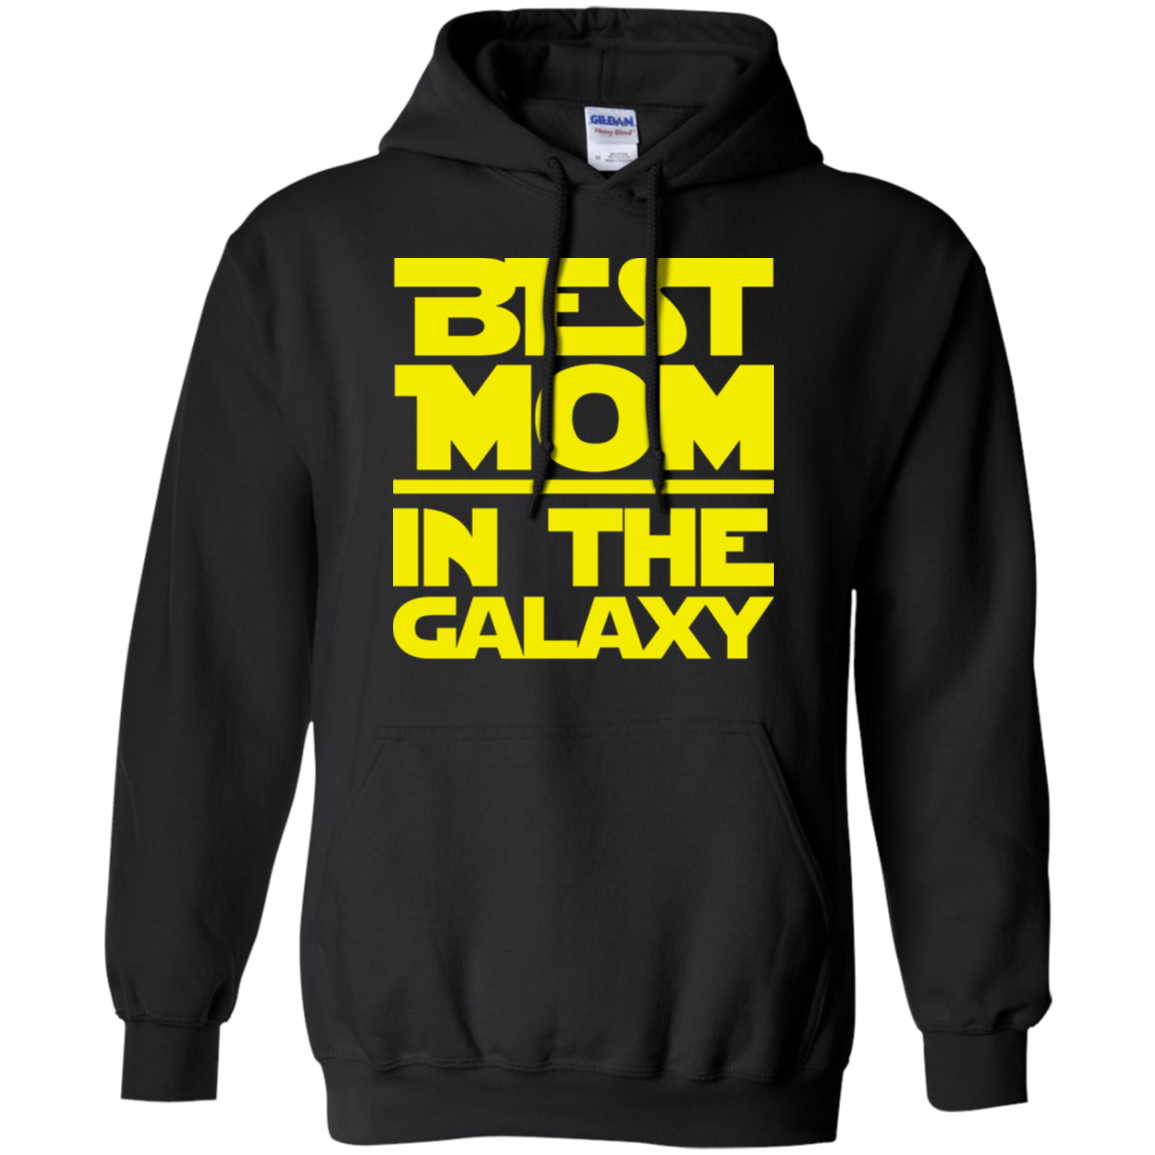 Best Mom In The Galaxy Pullover Hoodie 8 oz.